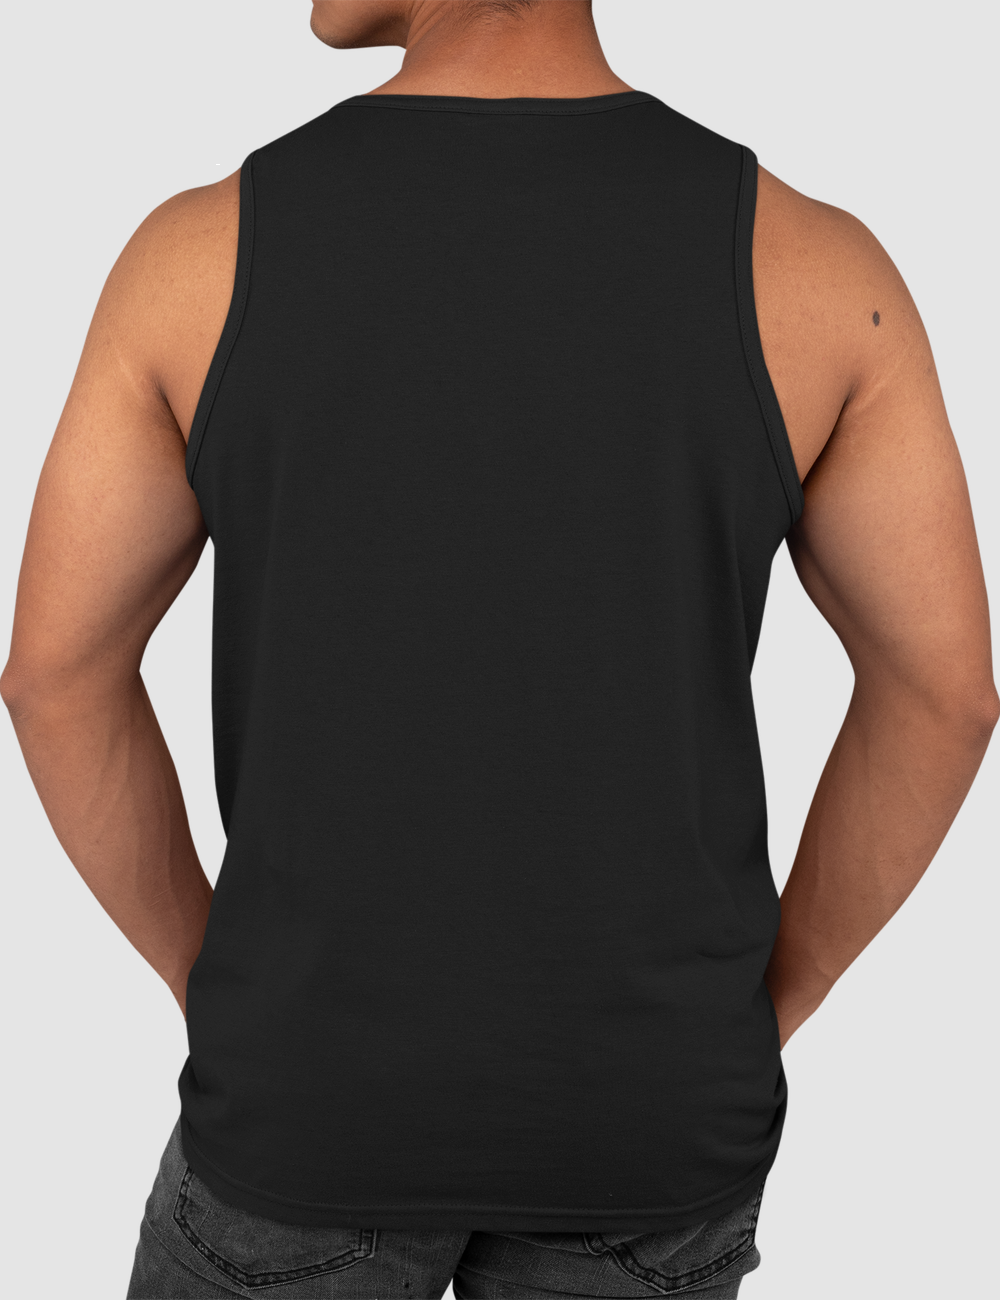 This Is What Awesome Looks Like | Men's Classic Tank Top OniTakai